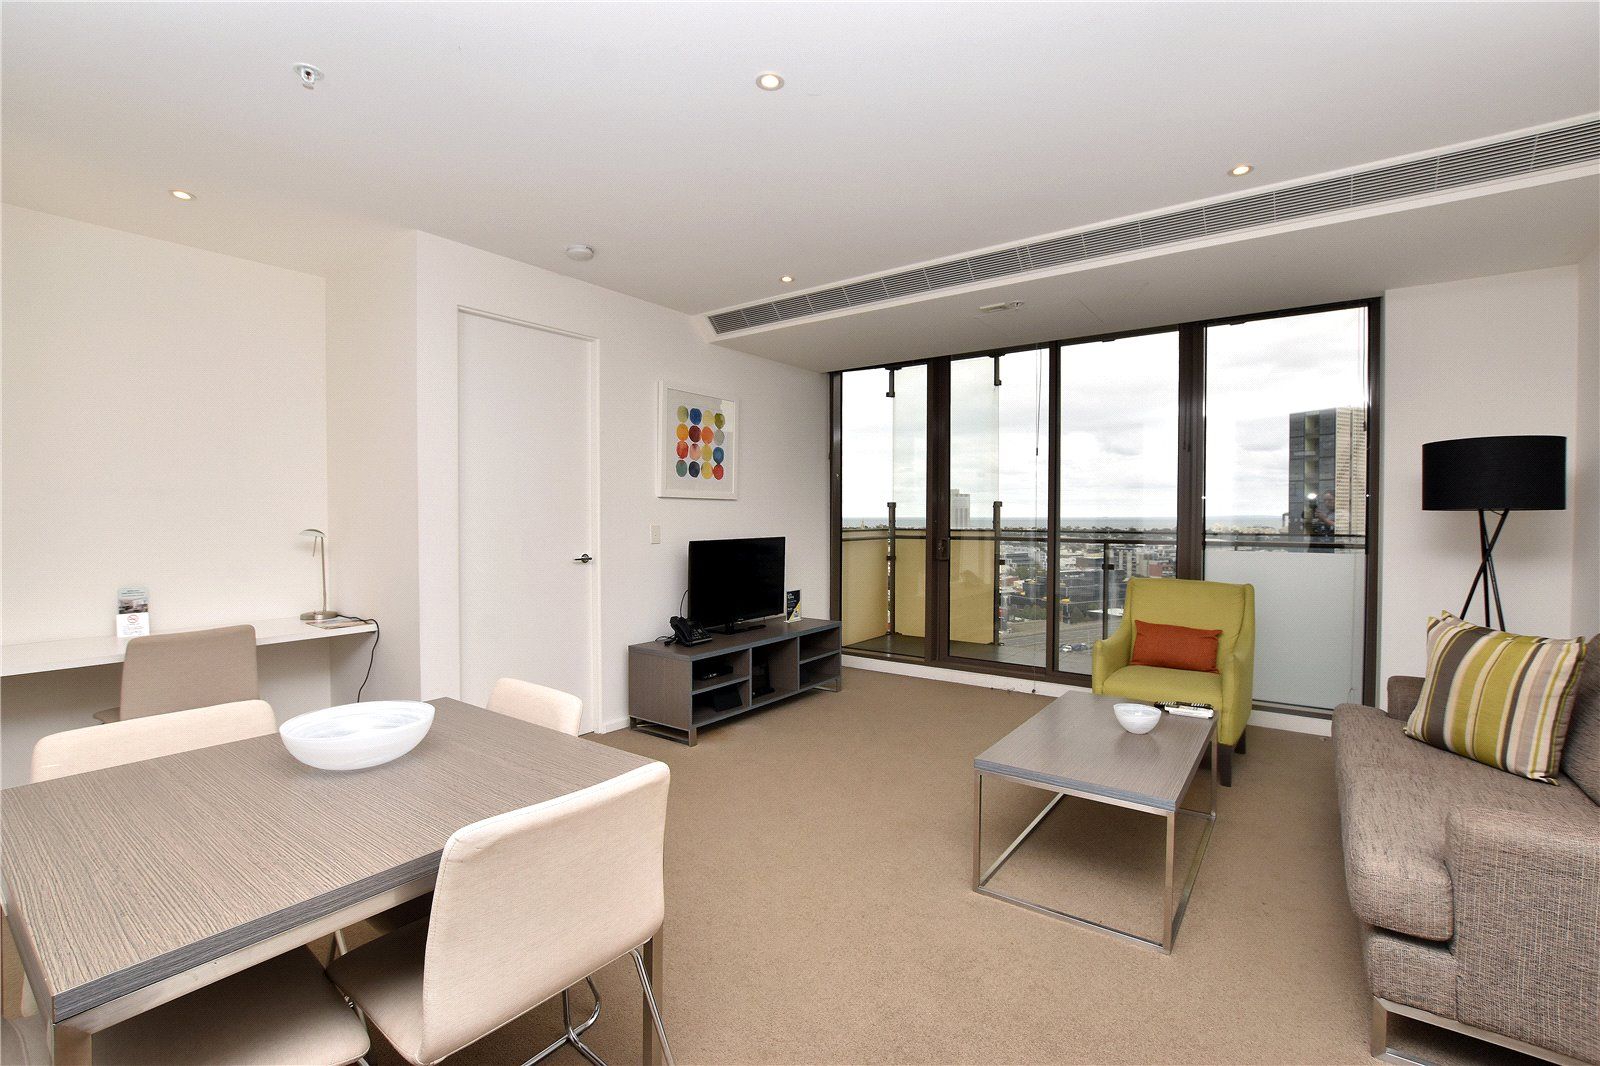 2 bedrooms Apartment / Unit / Flat in 2205/118 Kavanagh Street SOUTHBANK VIC, 3006